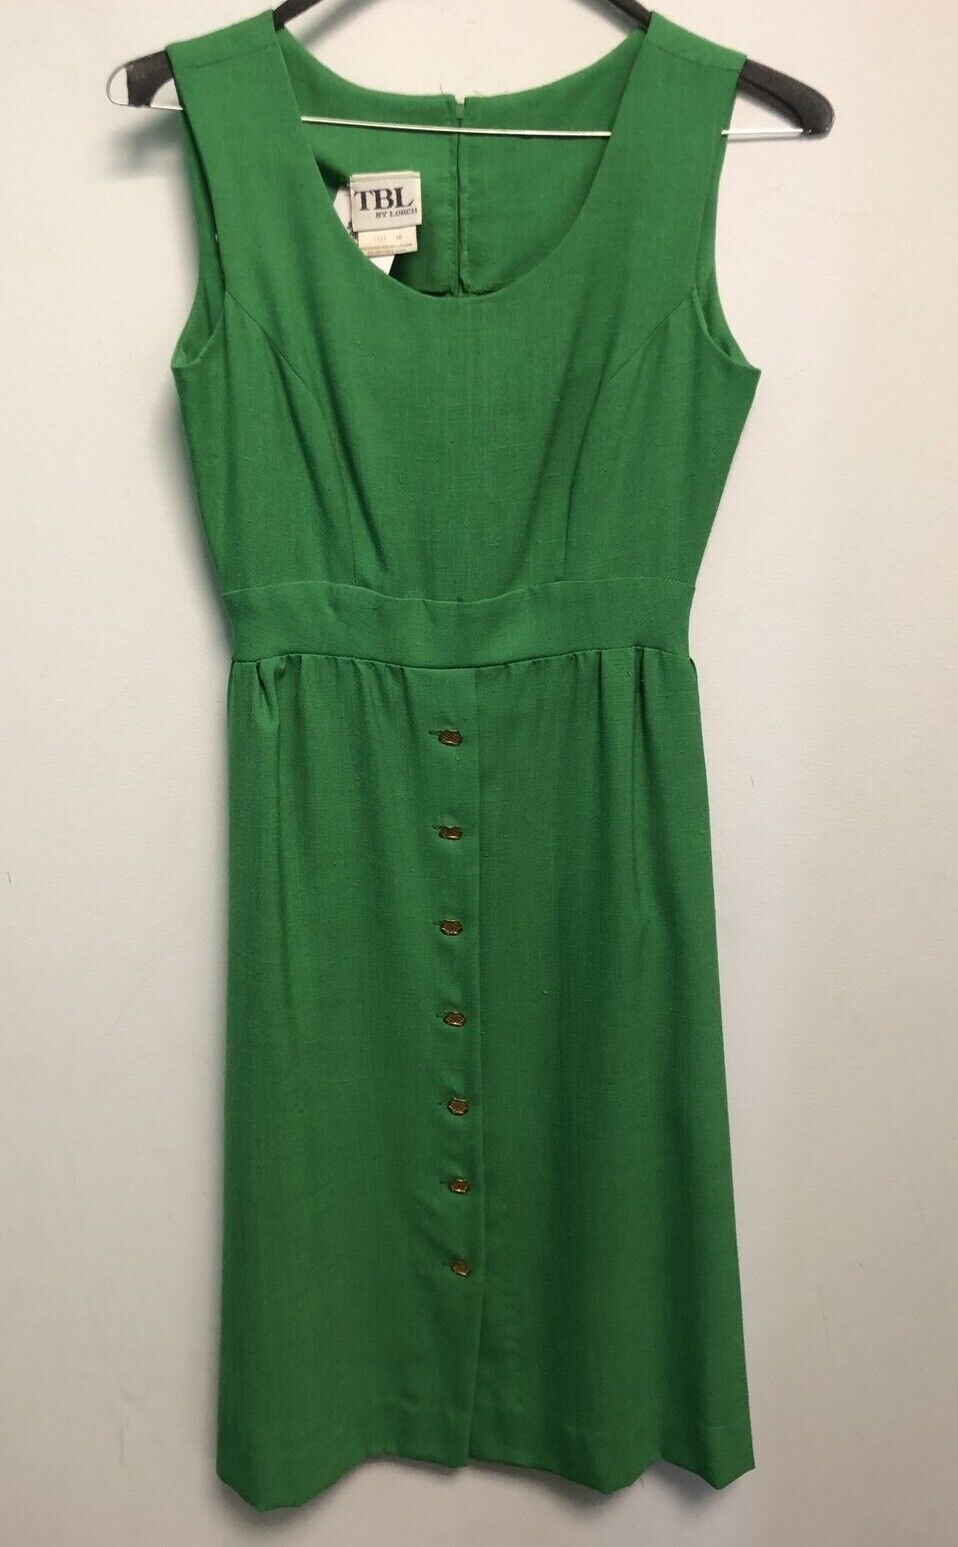 TBL By Lorch Vintage Size 10 70's Knits Dress Green Ornate Buttons Zip Back Flax